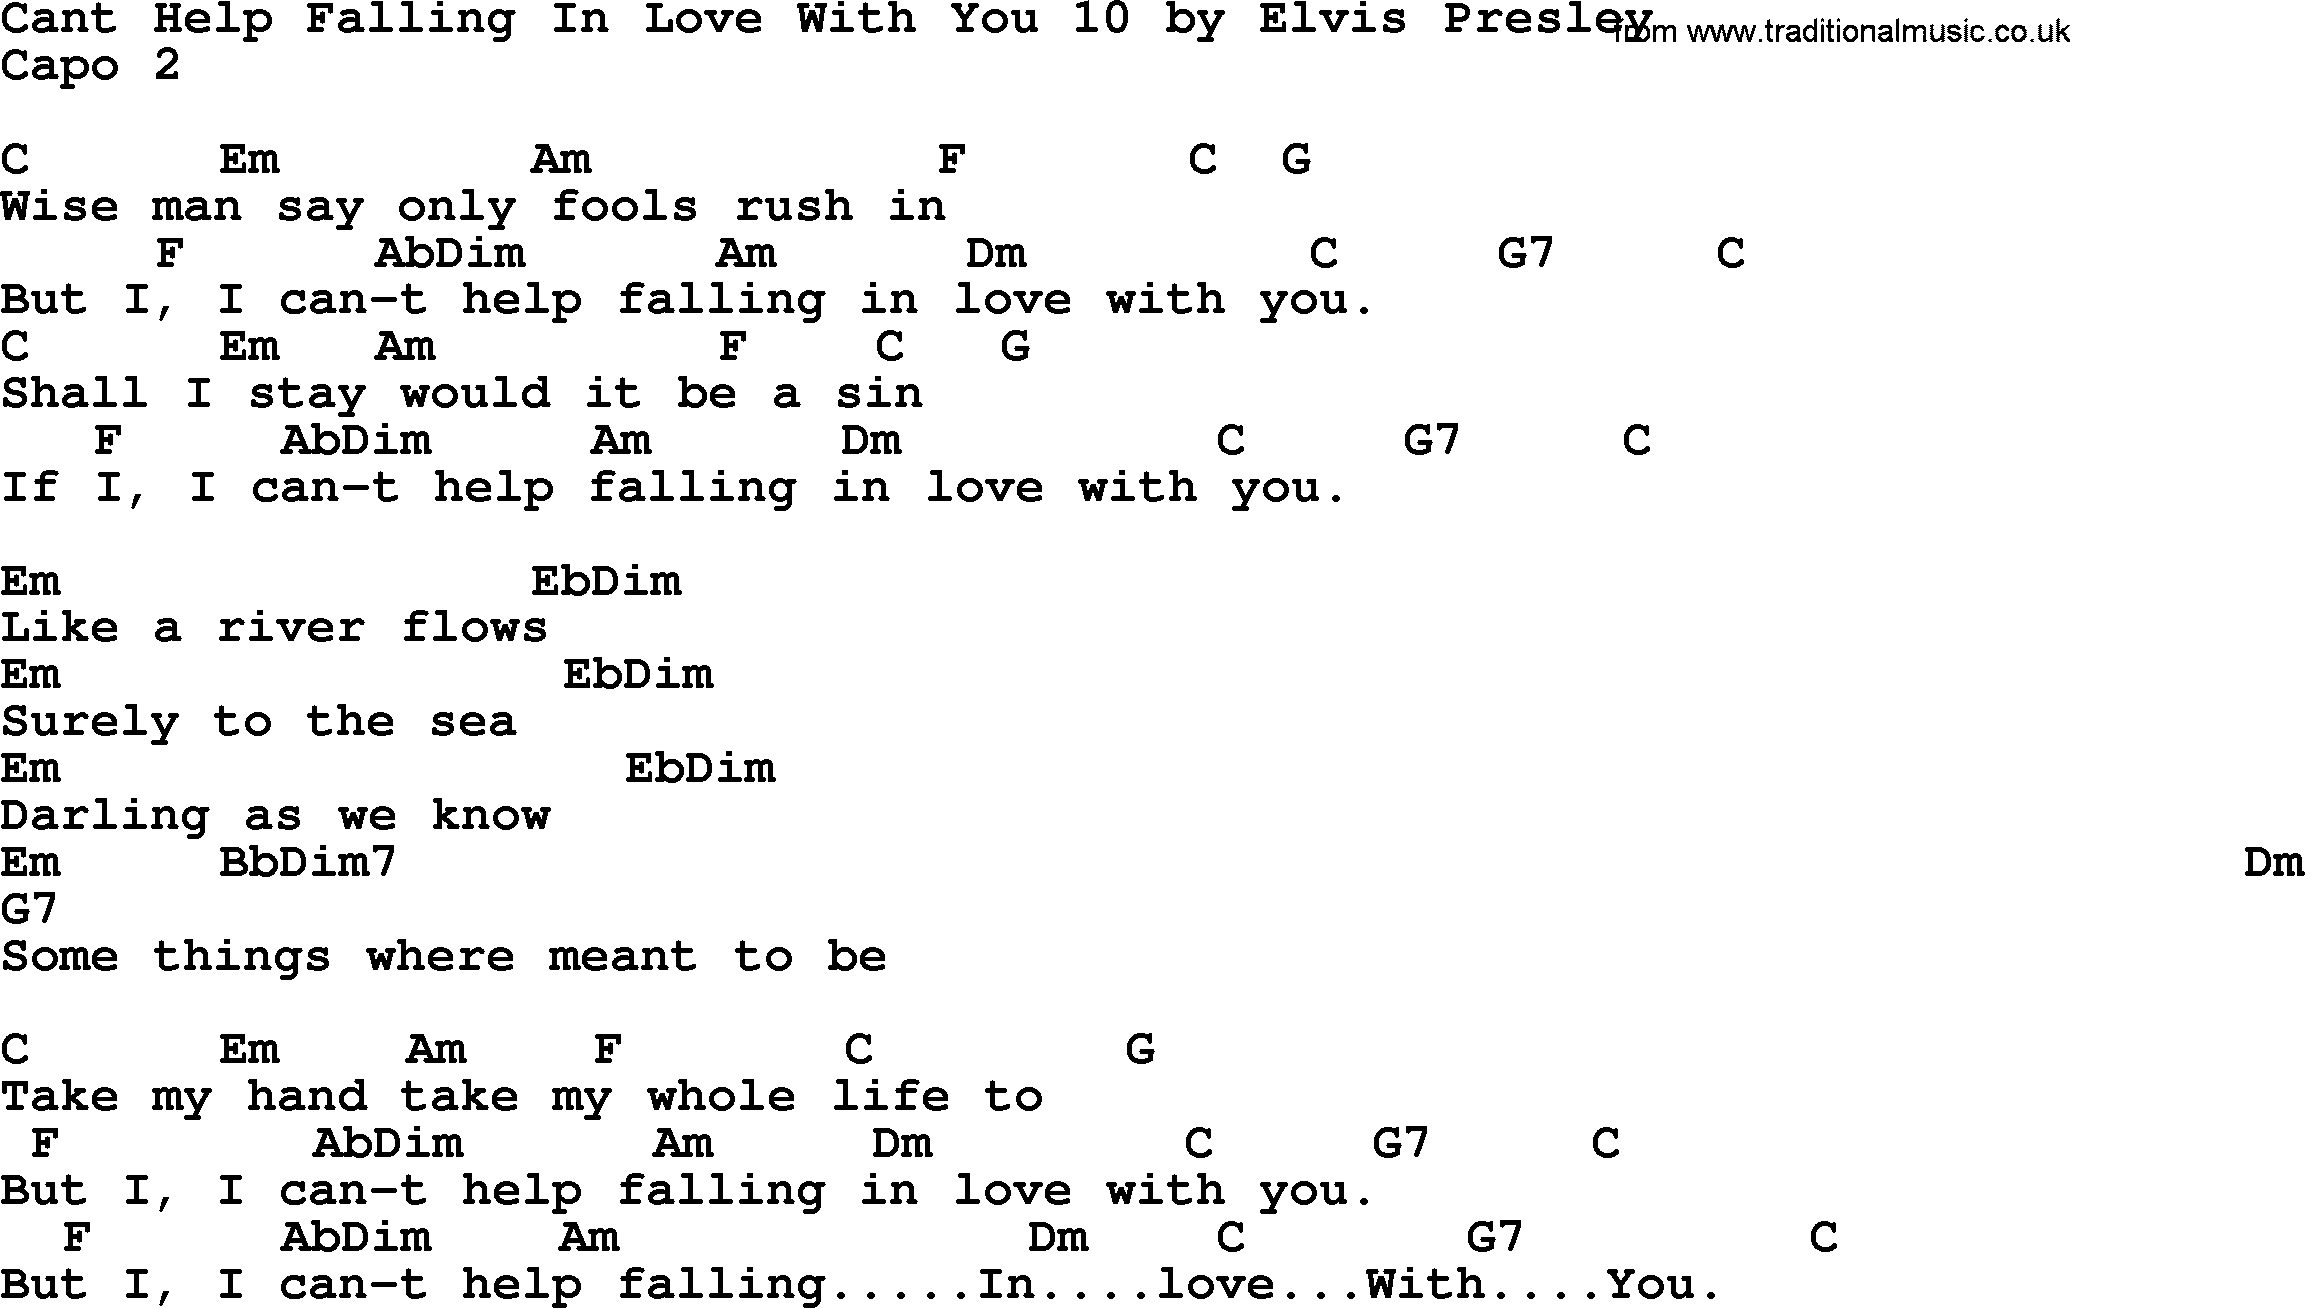 Elvis Presley song: Cant Help Falling In Love With You 10, lyrics and chords